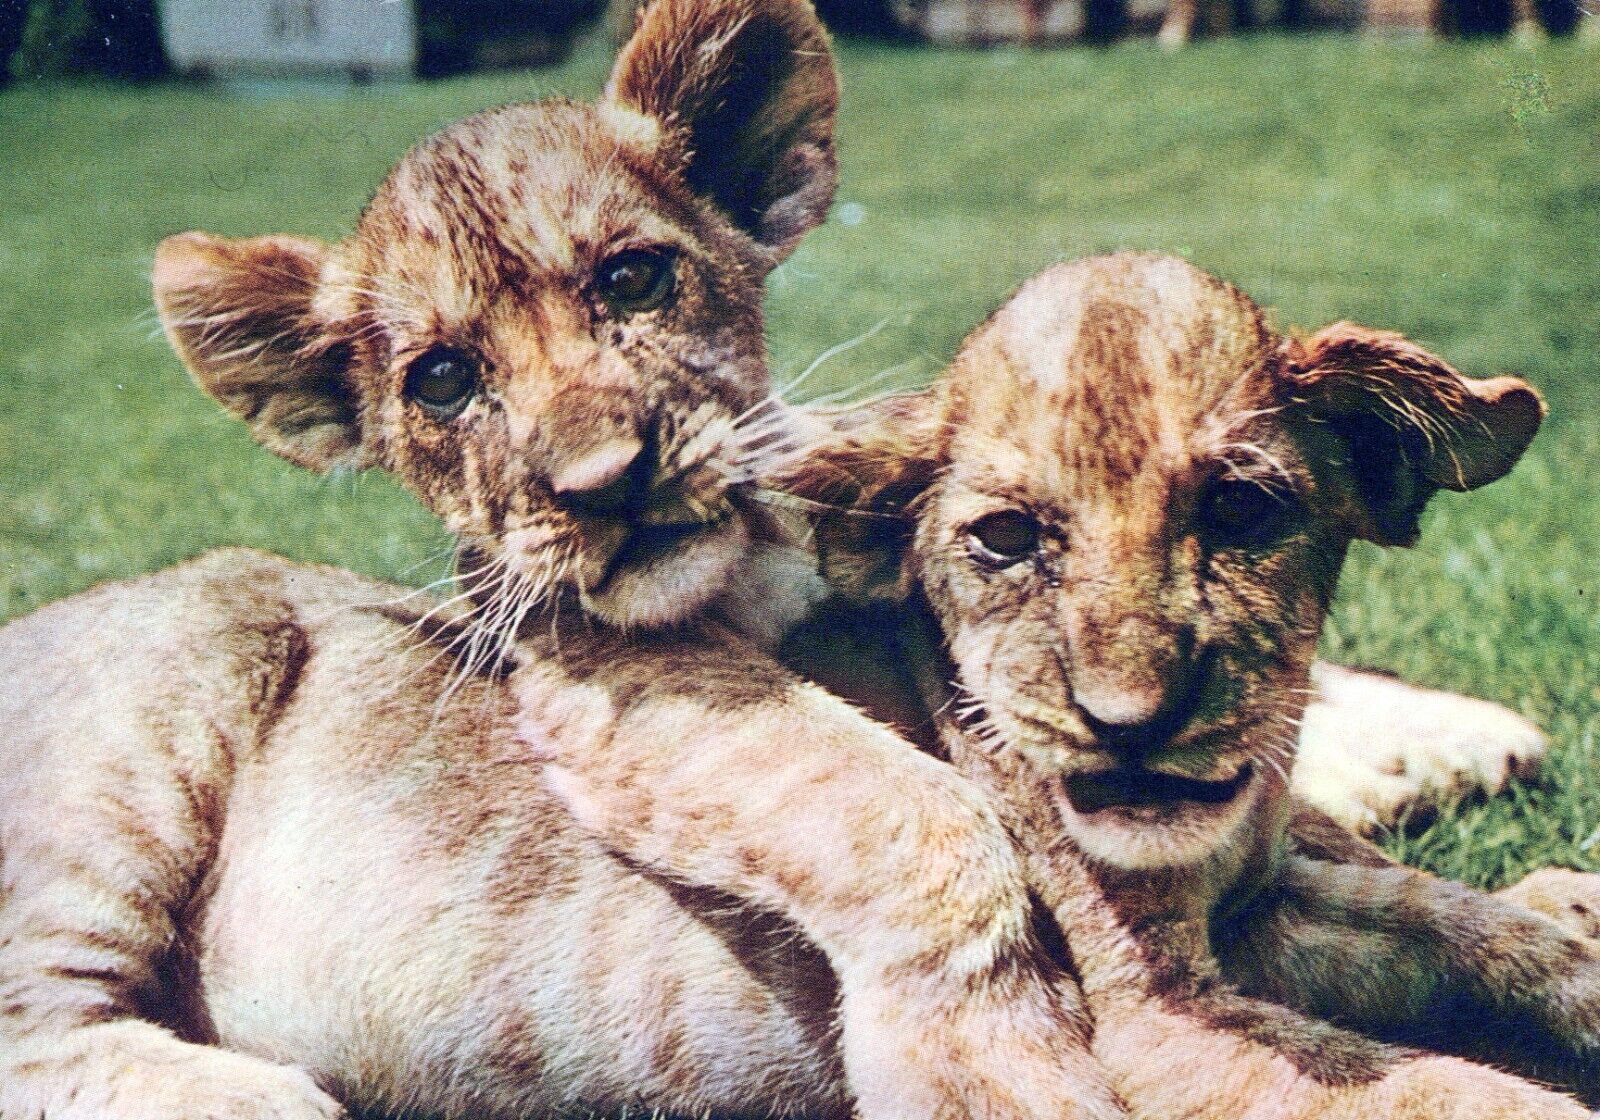 Young Lions. Posted in 1964 in Netherlands Chrome 4x6 Postcard